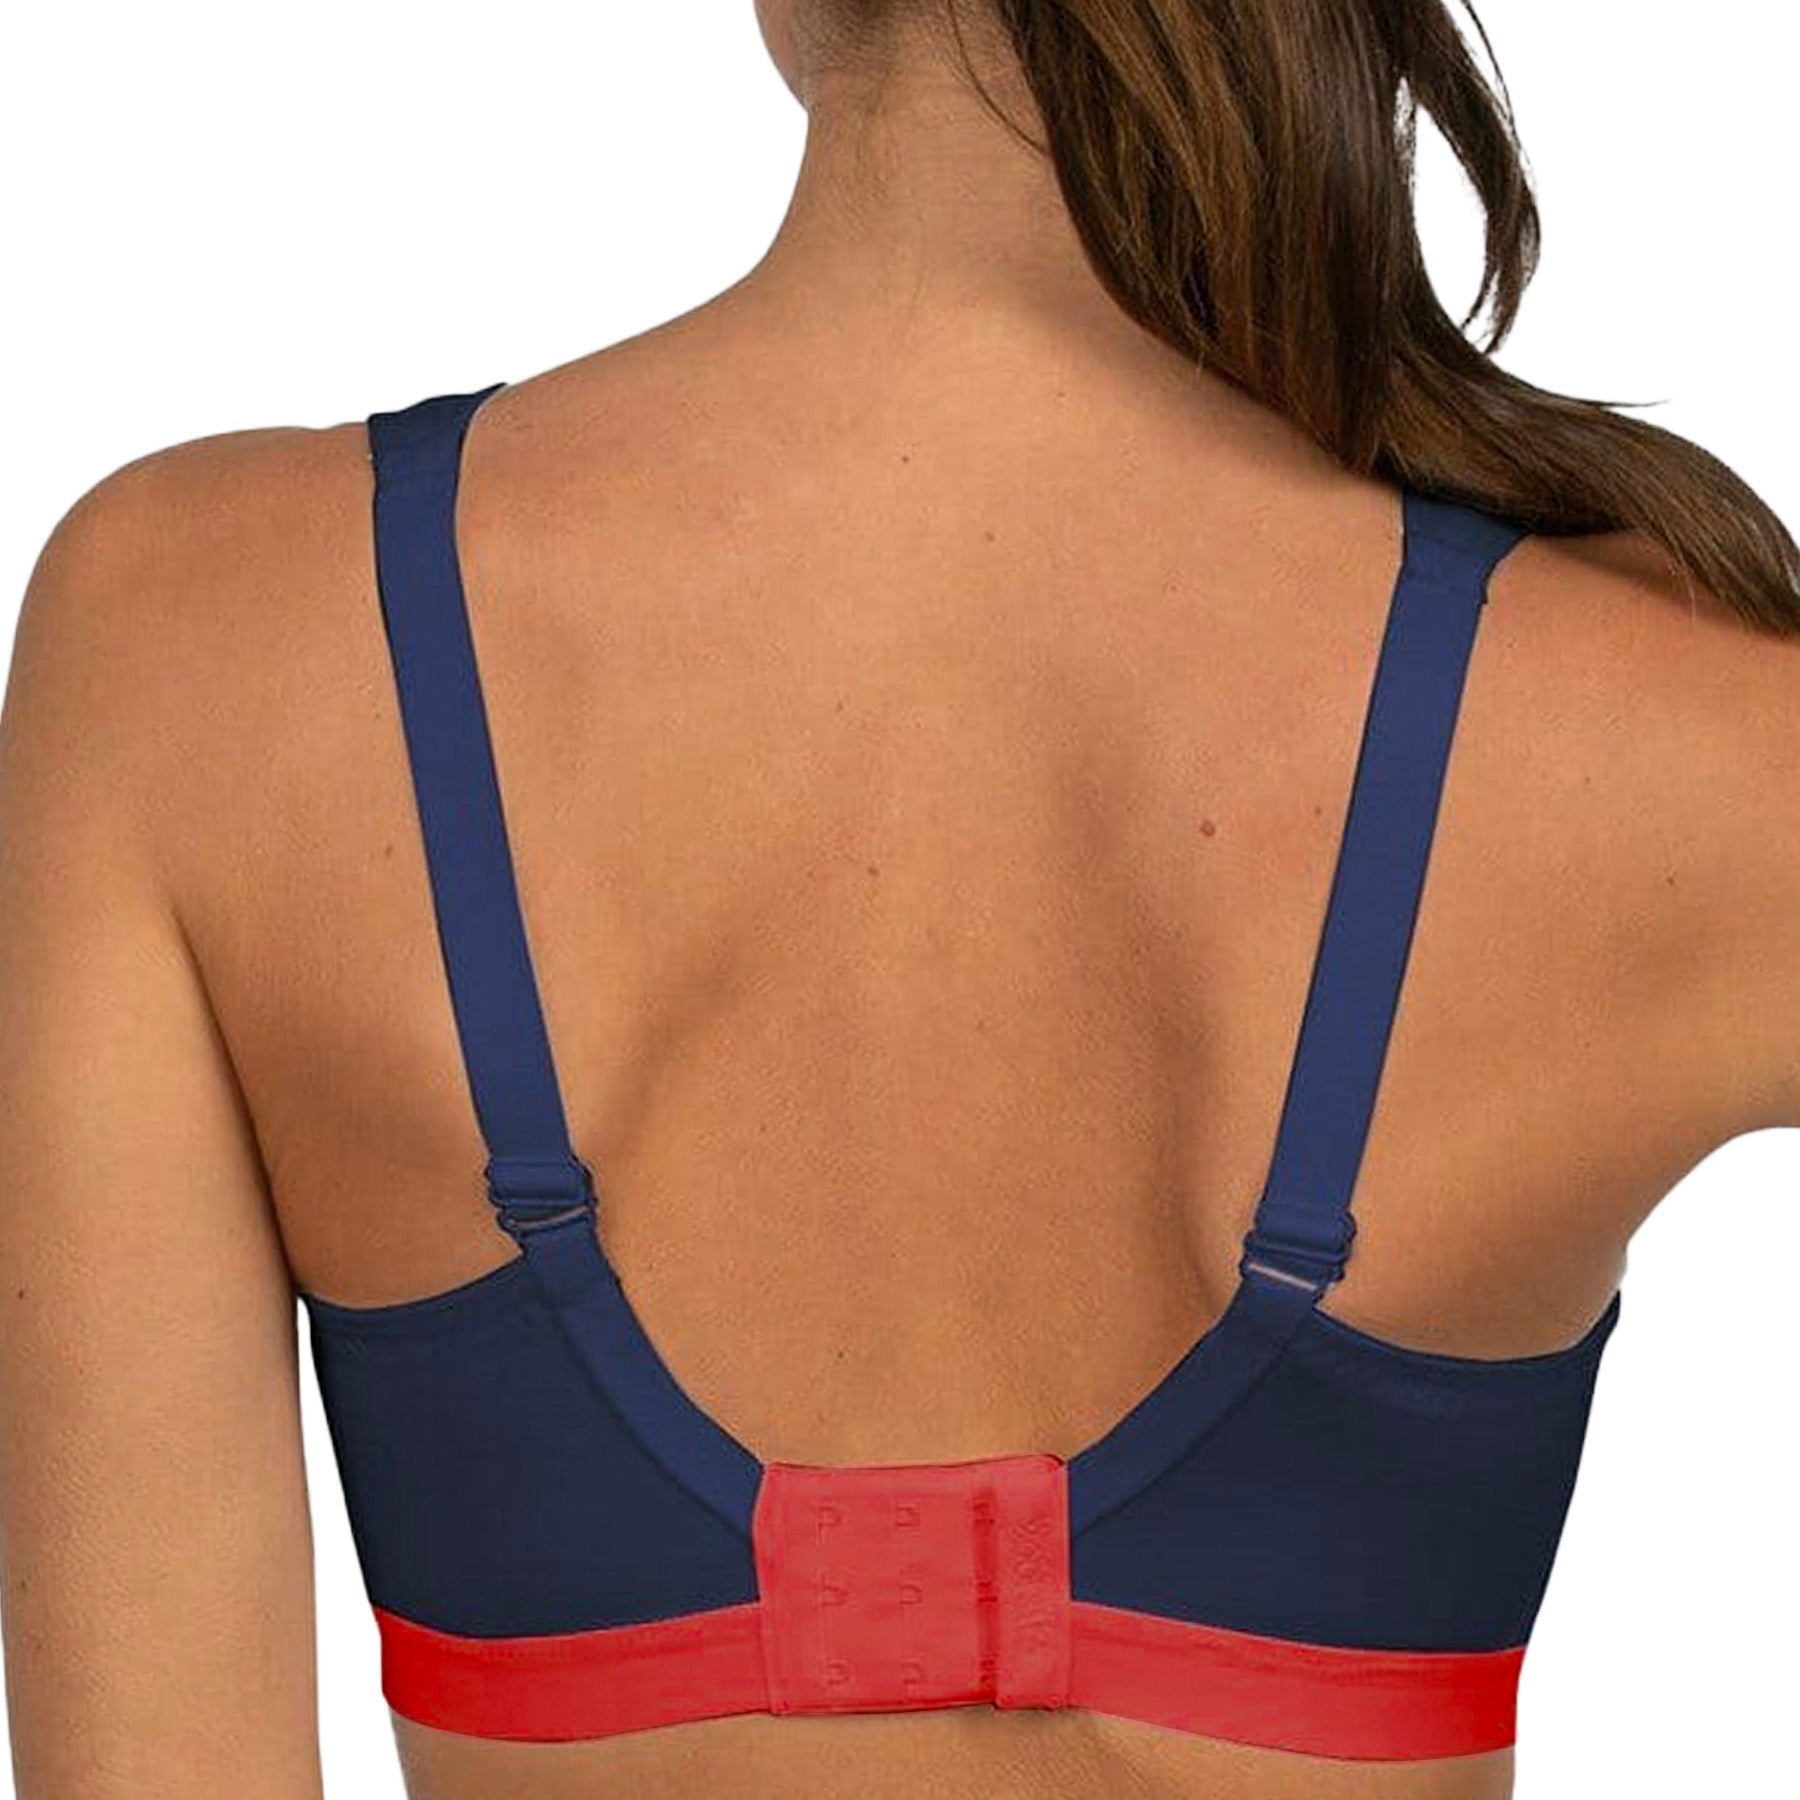 Shock Absorber D+ Max Support Sports Bra SN109/U10035 Navy Red Rear View